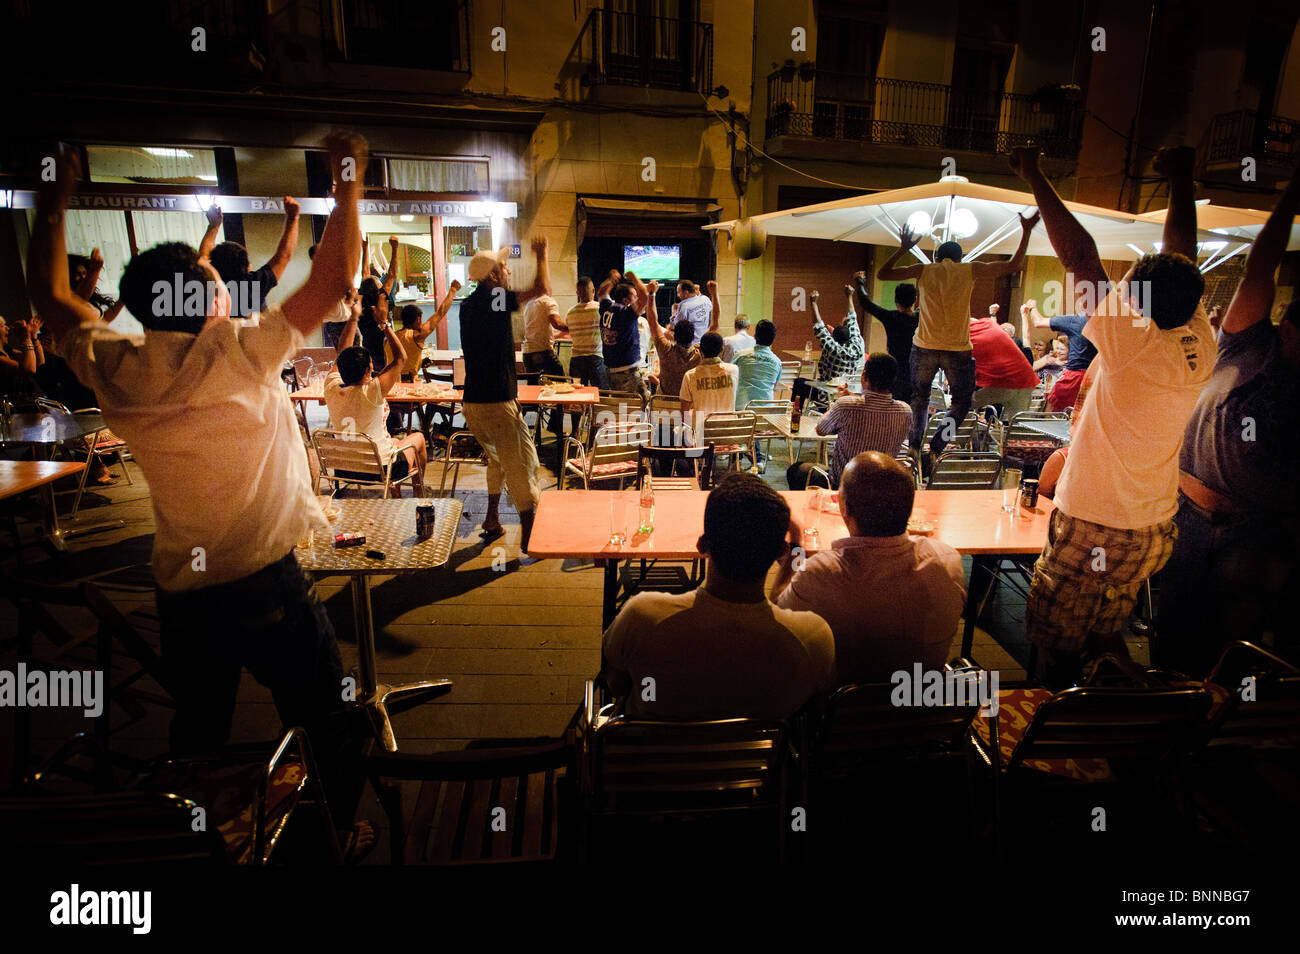 Spain scores the winning goal in the World Cup Final - July 2010 - as seen in a square in Manresa, Spain Stock Photo